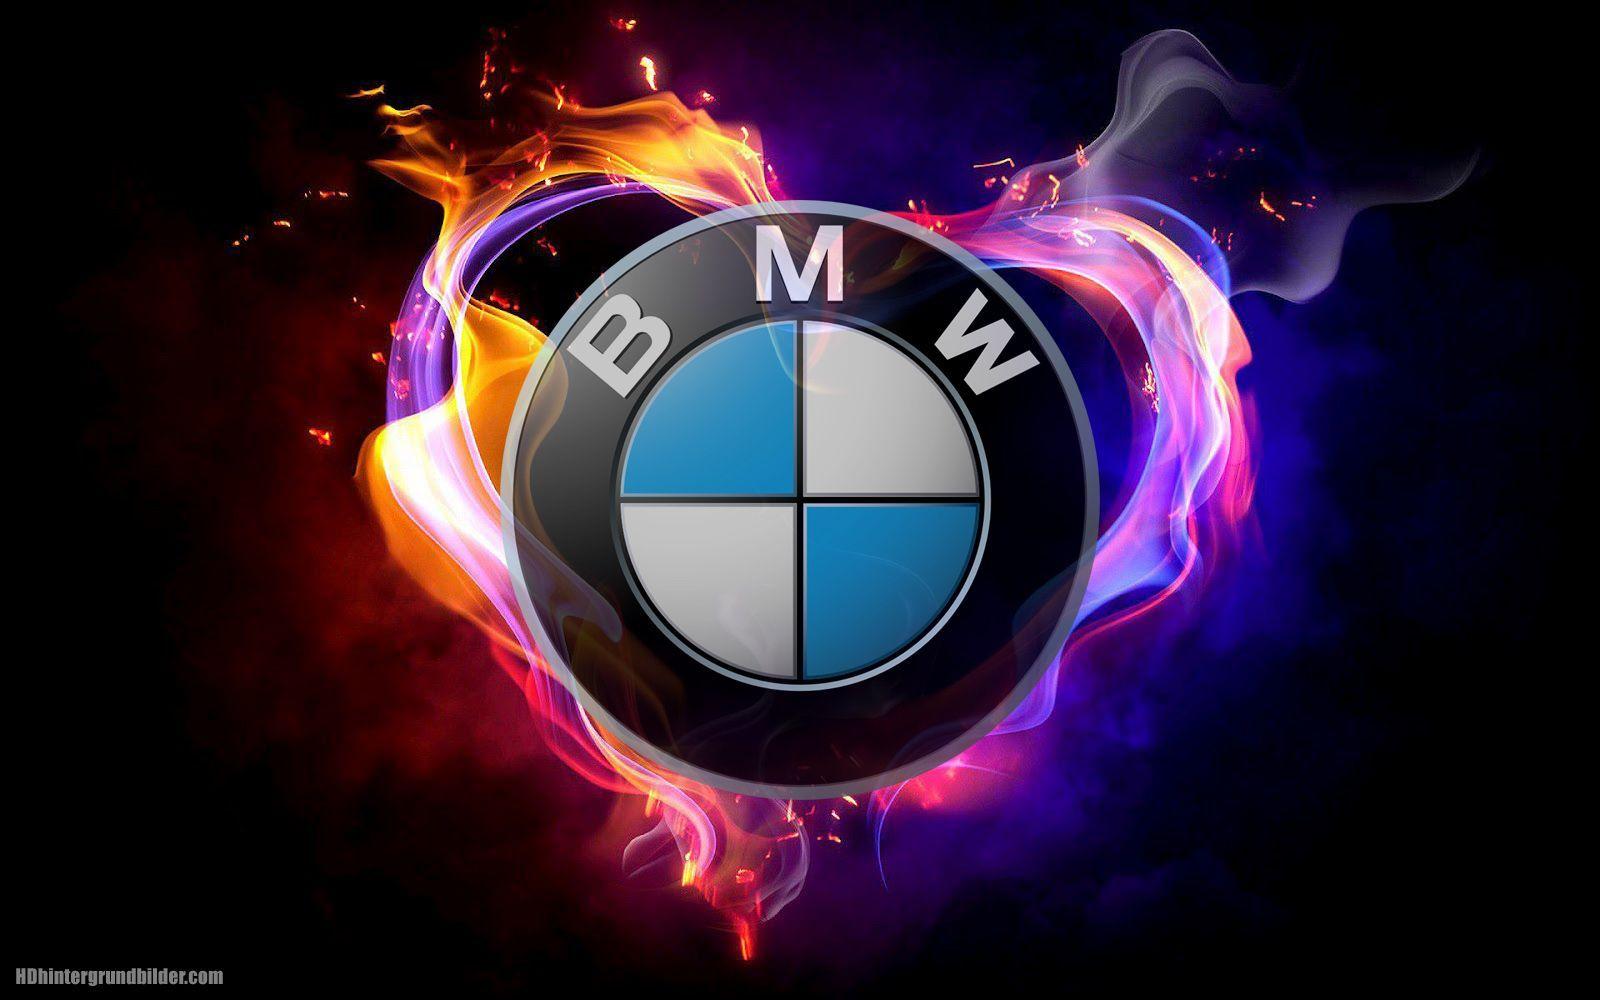 BMW Logo Wallpapers - Top Free BMW Logo Backgrounds ...